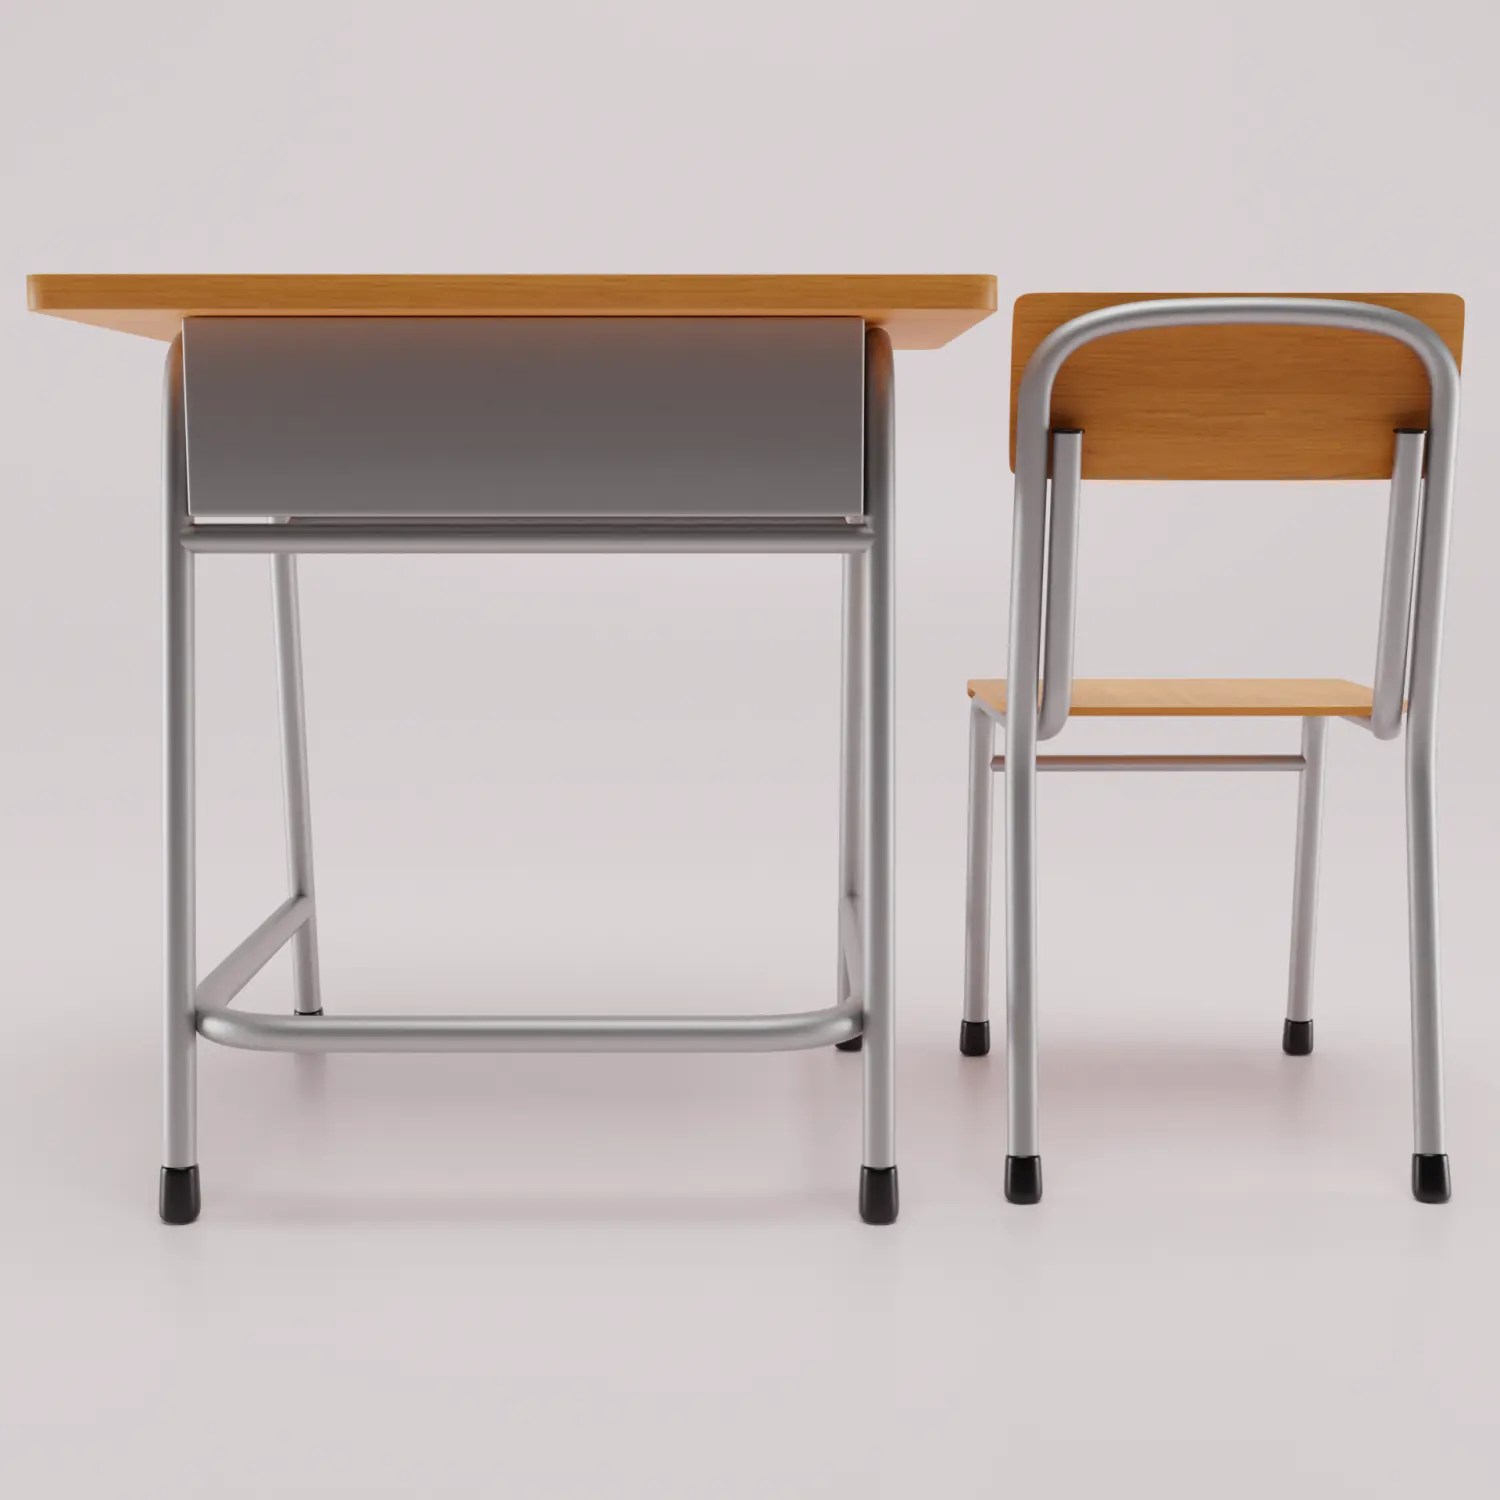 Comfortable Student Modern Children Study Single Desk and Chair Classroom Furniture Iron Chair Primary School Desk and Chair